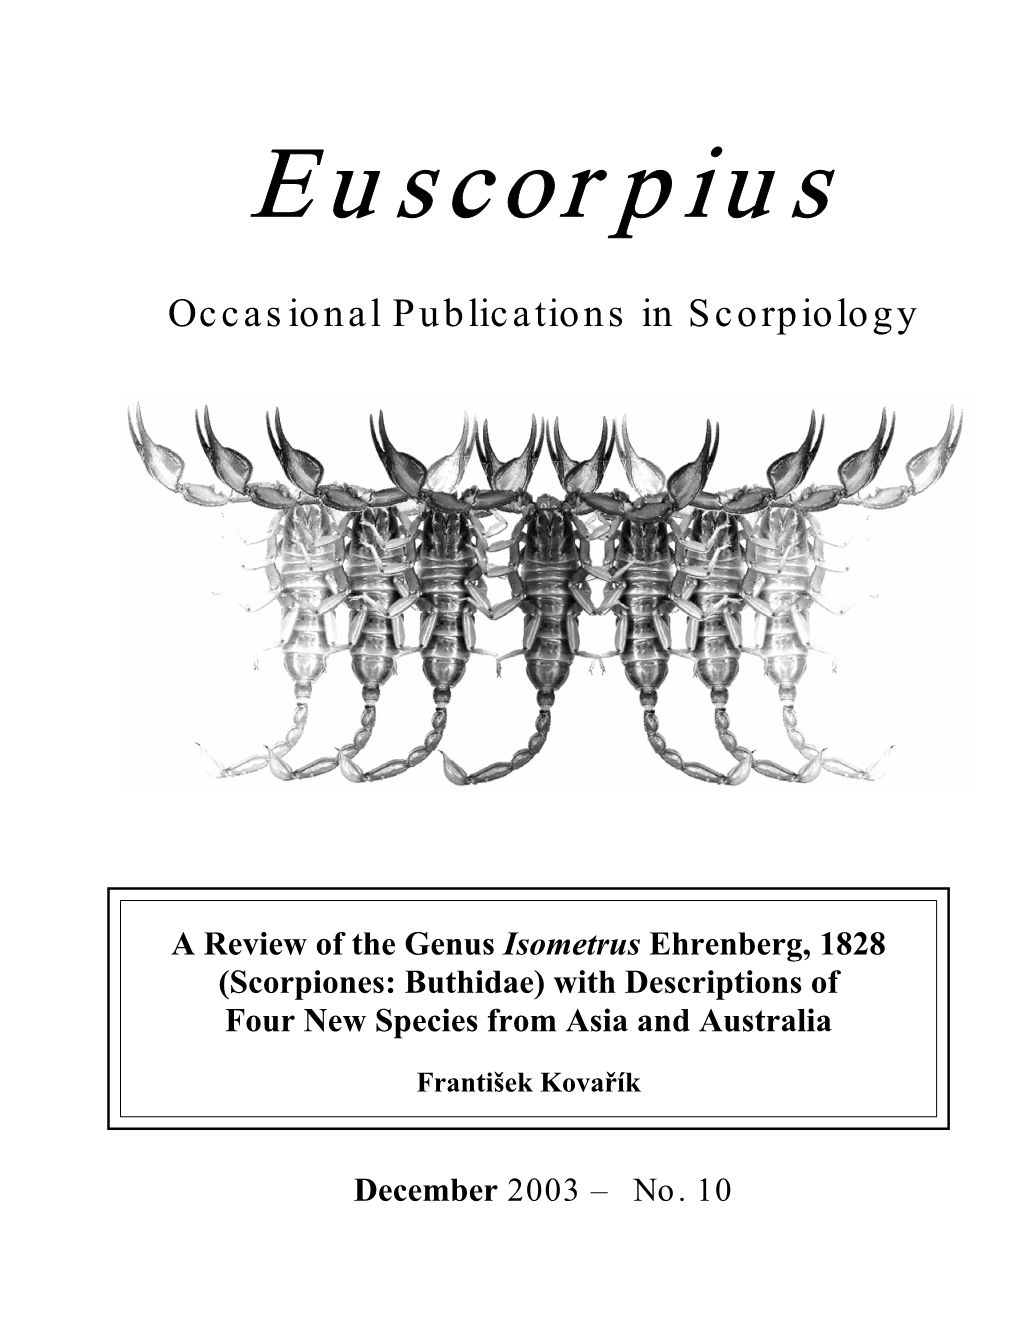 A Review of the Genus Isometrus Ehrenberg, 1828 (Scorpiones: Buthidae) with Descriptions of Four New Species from Asia and Australia